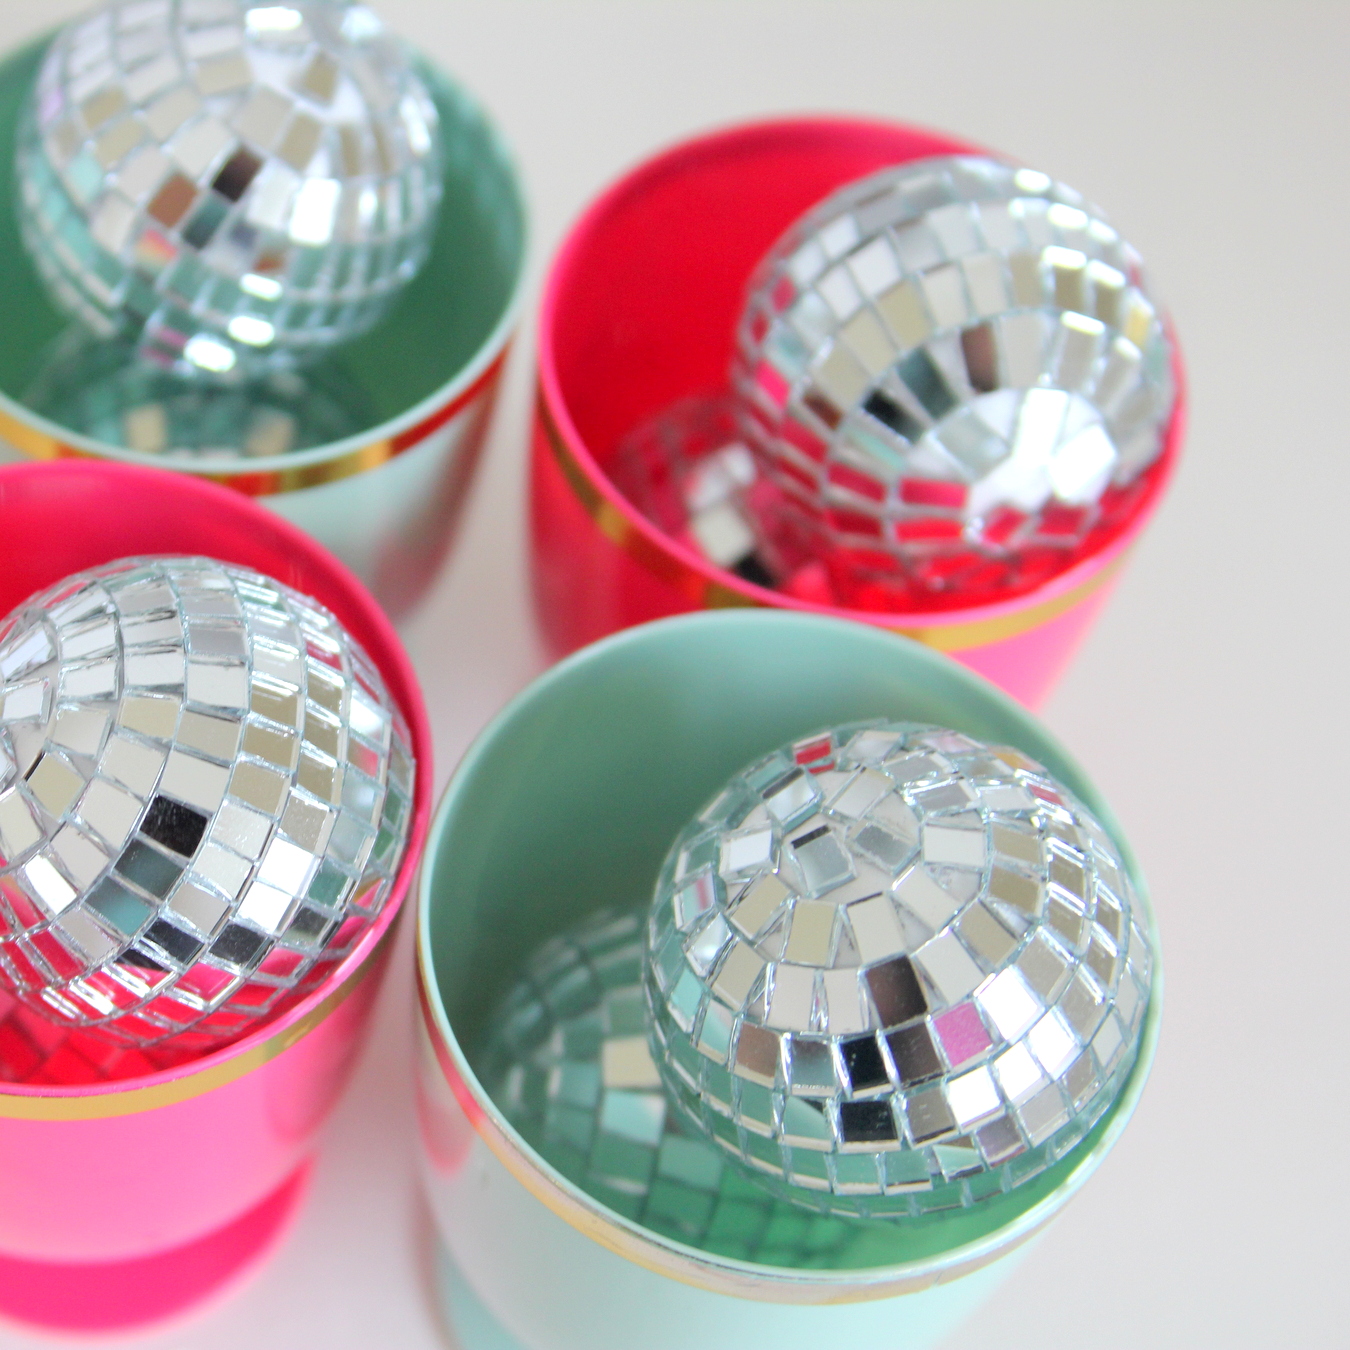 Time to party like a rock star! This sweet rock star birthday party includes all sorts of party ideas- like the abundance of disco balls!